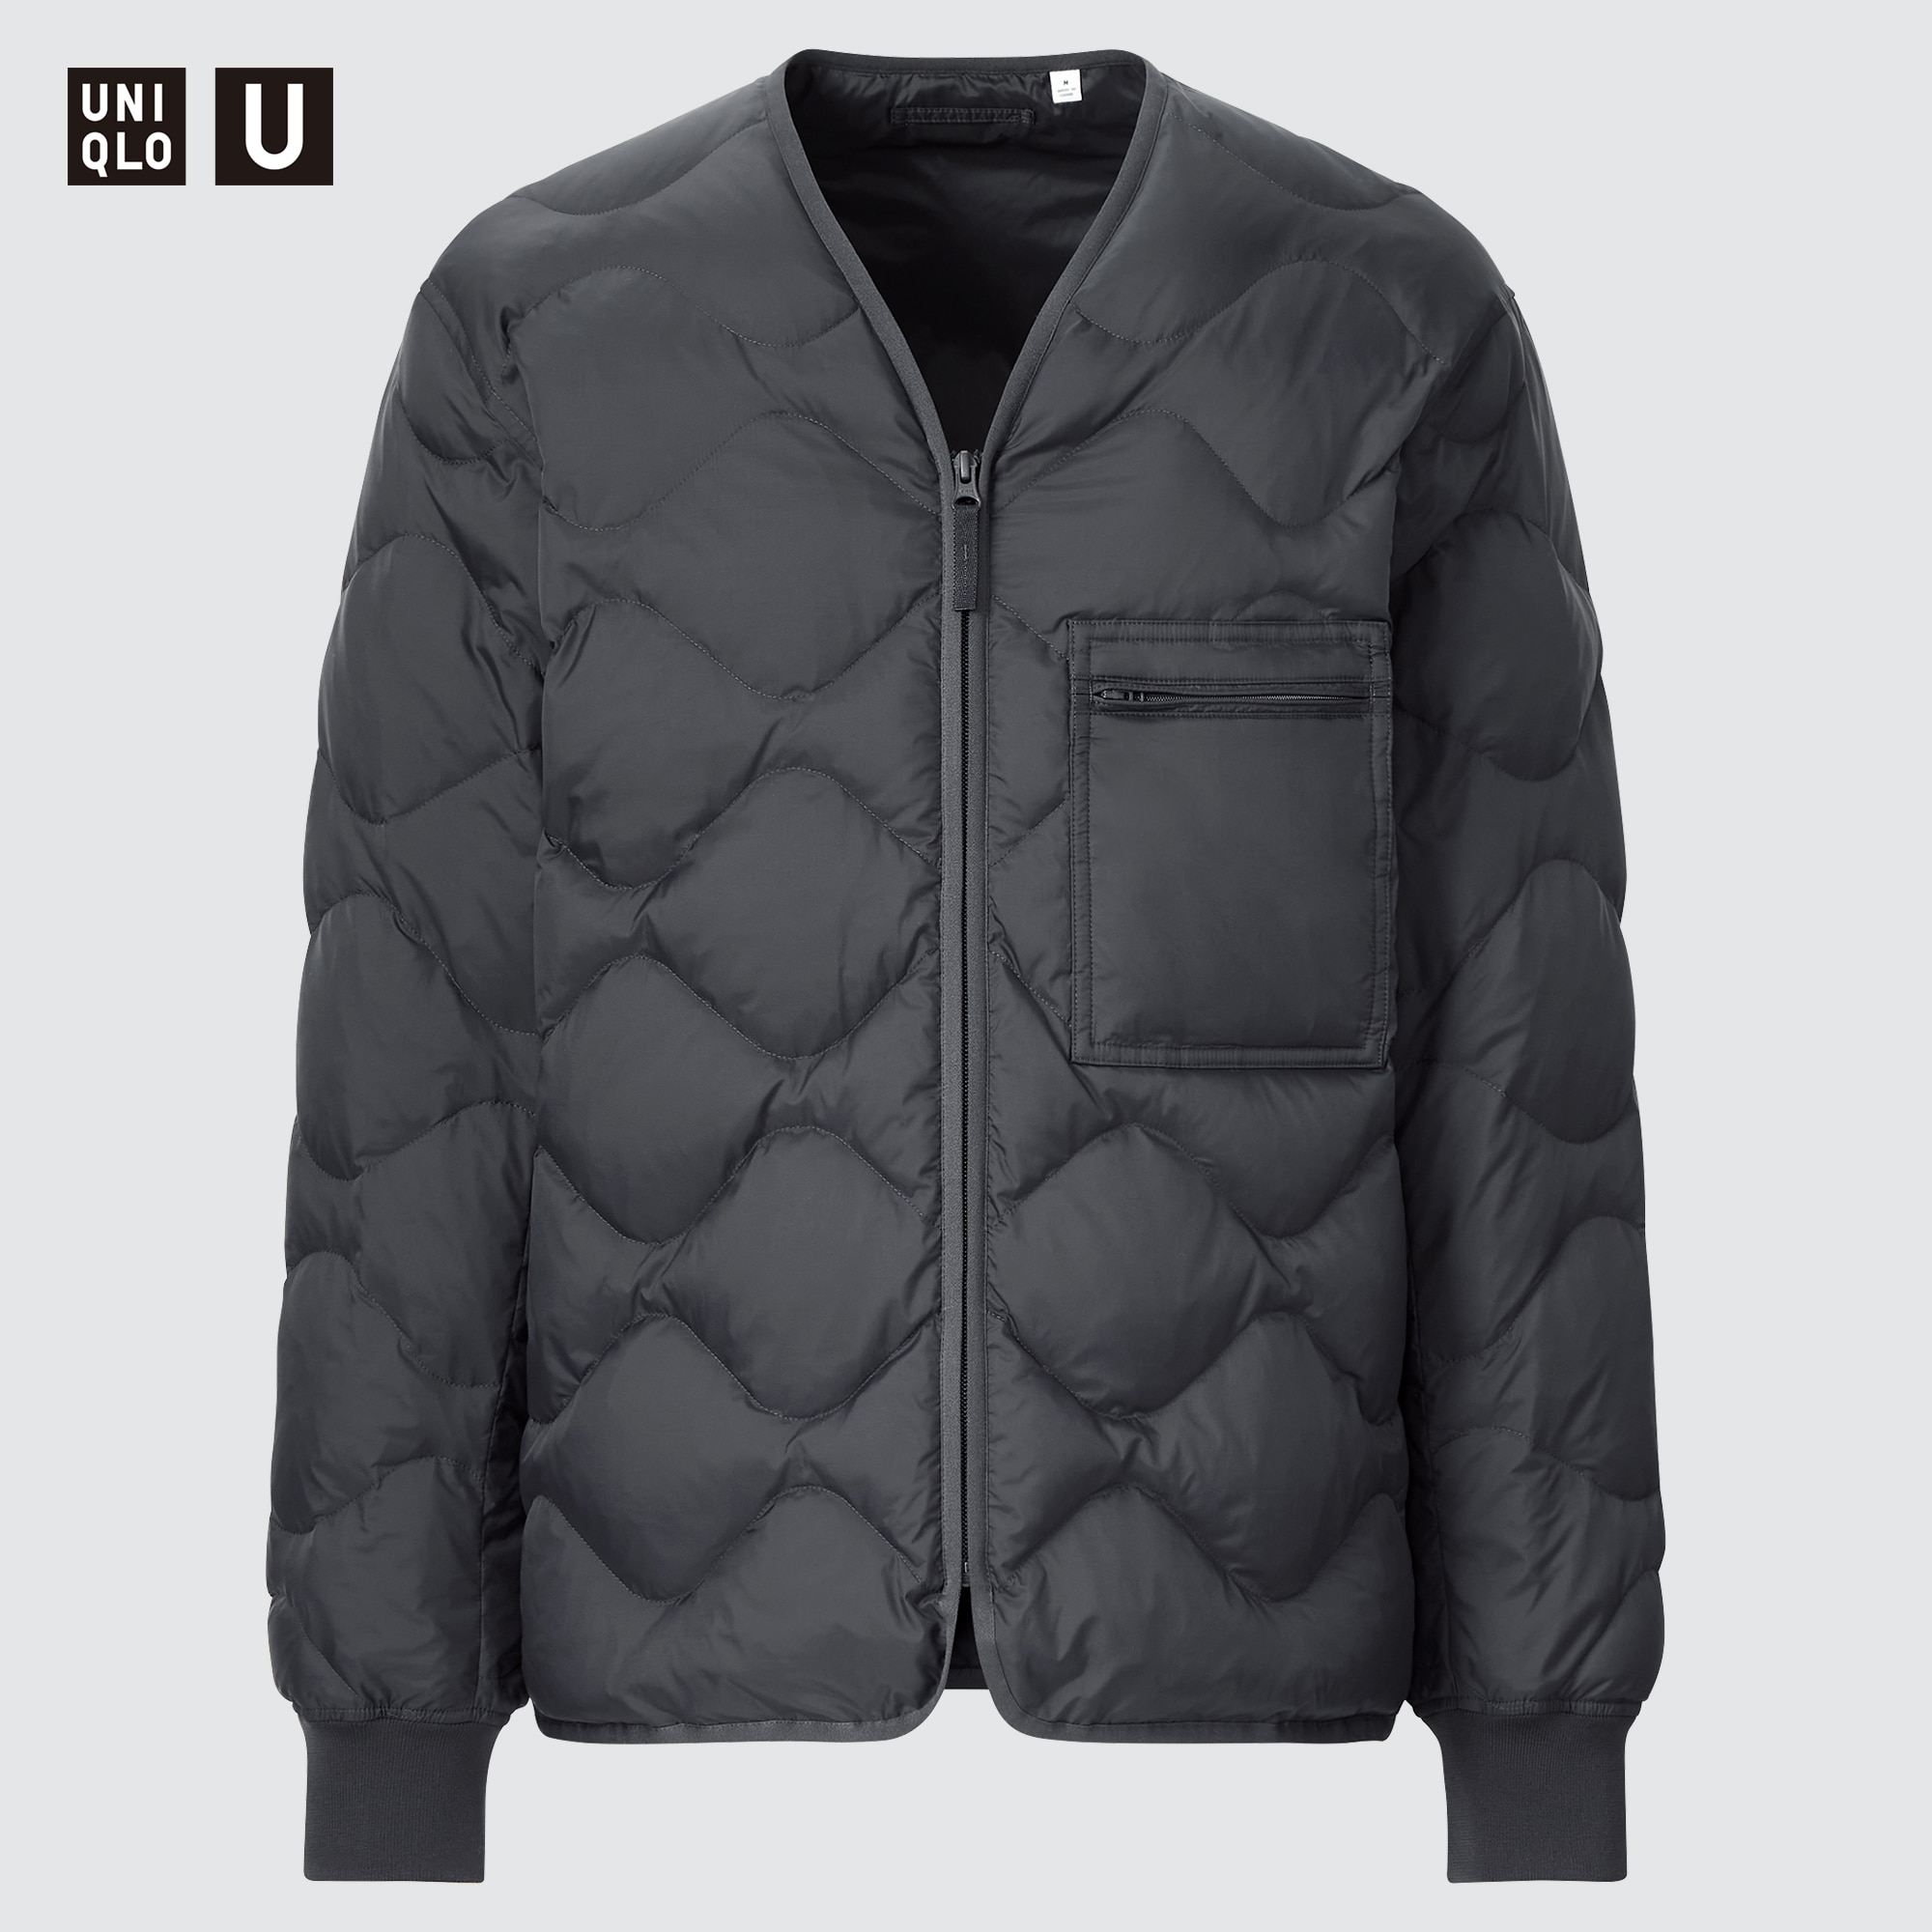 Uniqlo Recycled Down Jacket | peacecommission.kdsg.gov.ng